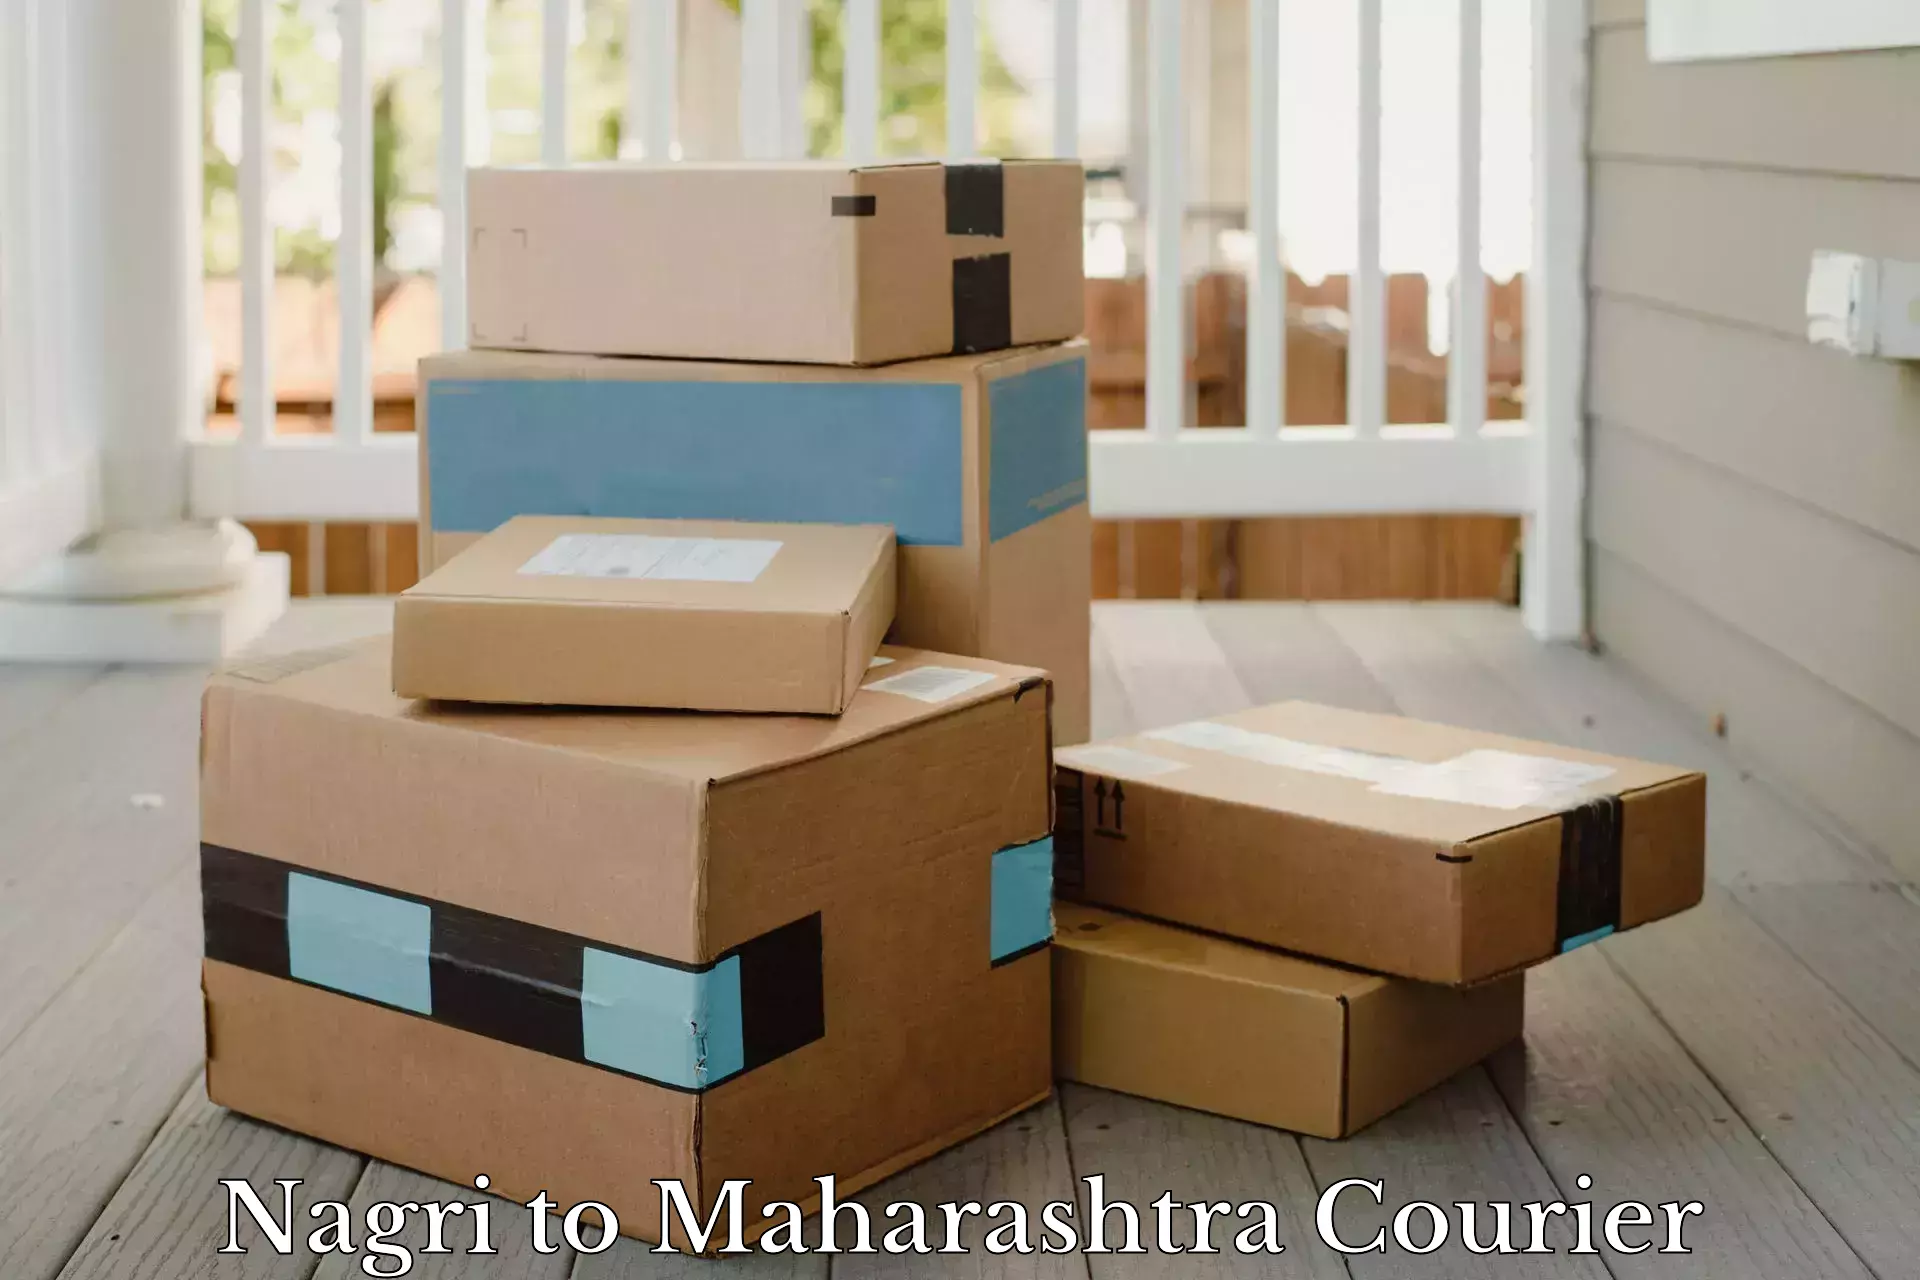 24-hour delivery options in Nagri to Shevgaon